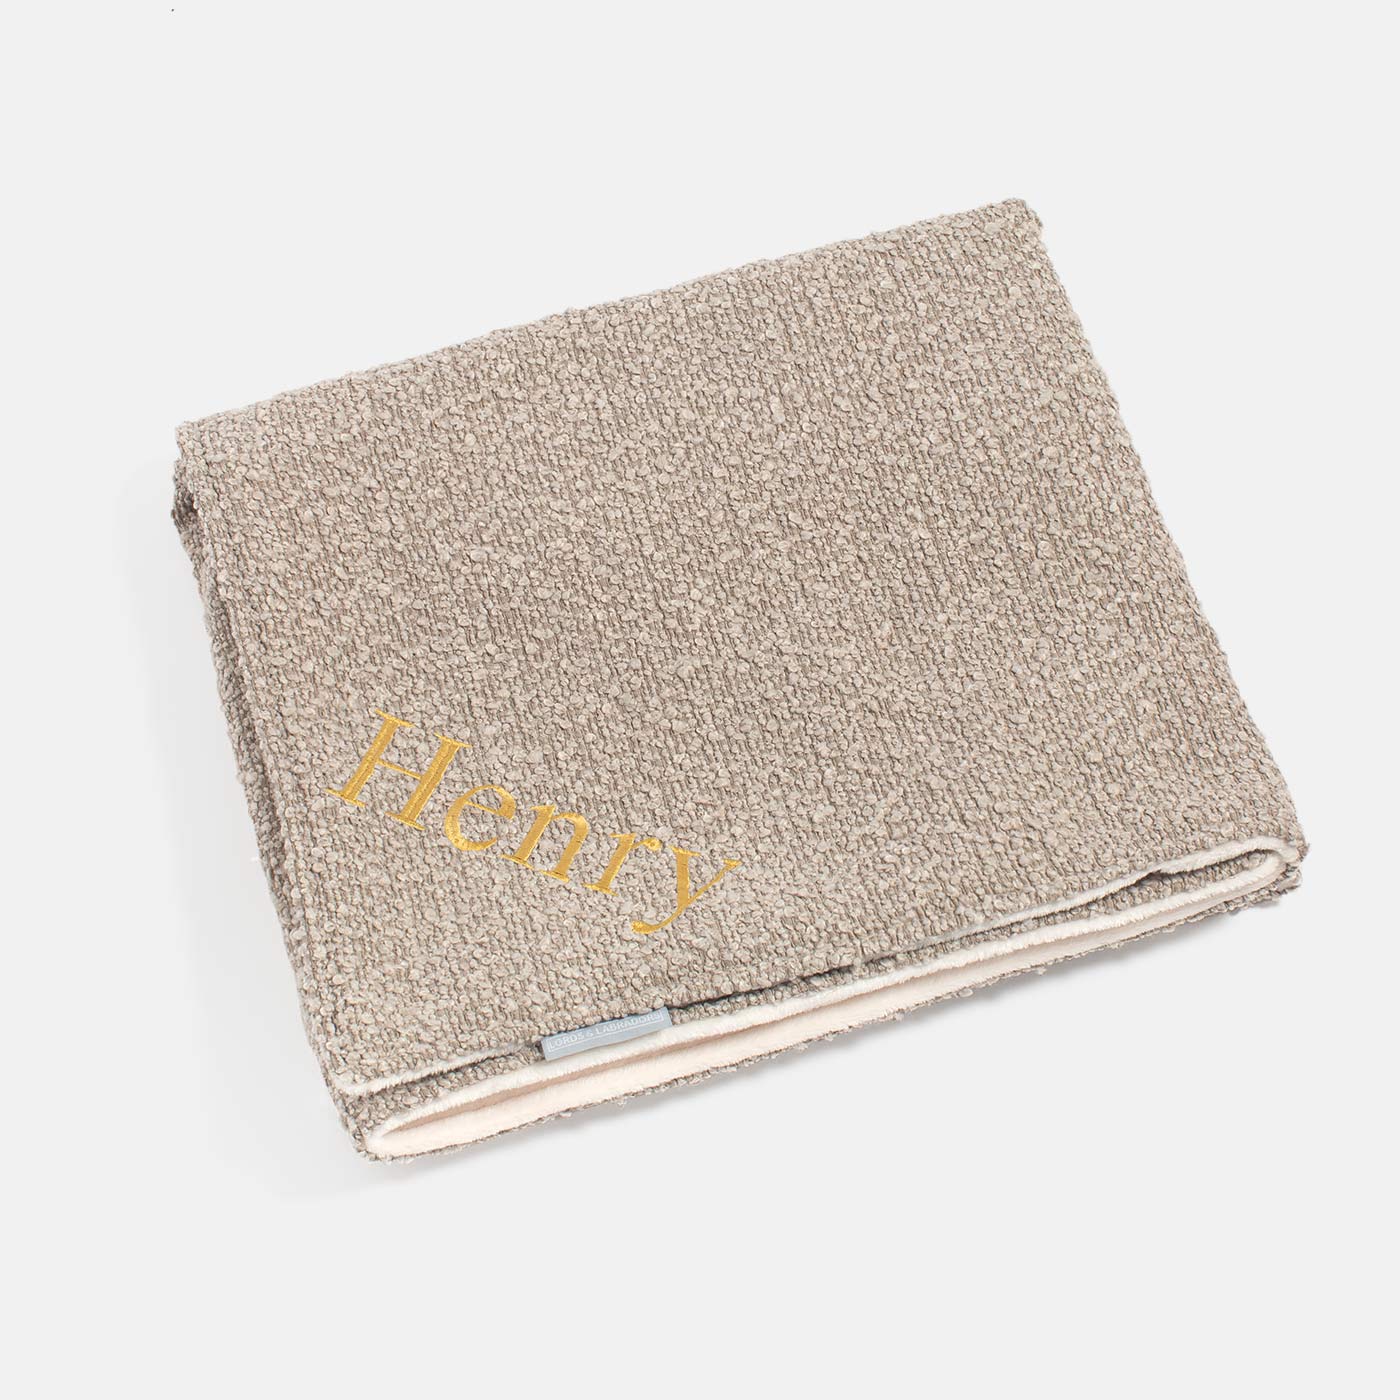 [colour:Mink Boucle]   Super Soft Sherpa & Teddy Fleece Lining, Our Luxury Cat & Kitten Blanket In Stunning Mink Boucle I The Perfect Cat Bed Accessory! Available To Personalise at Lords & Labradors